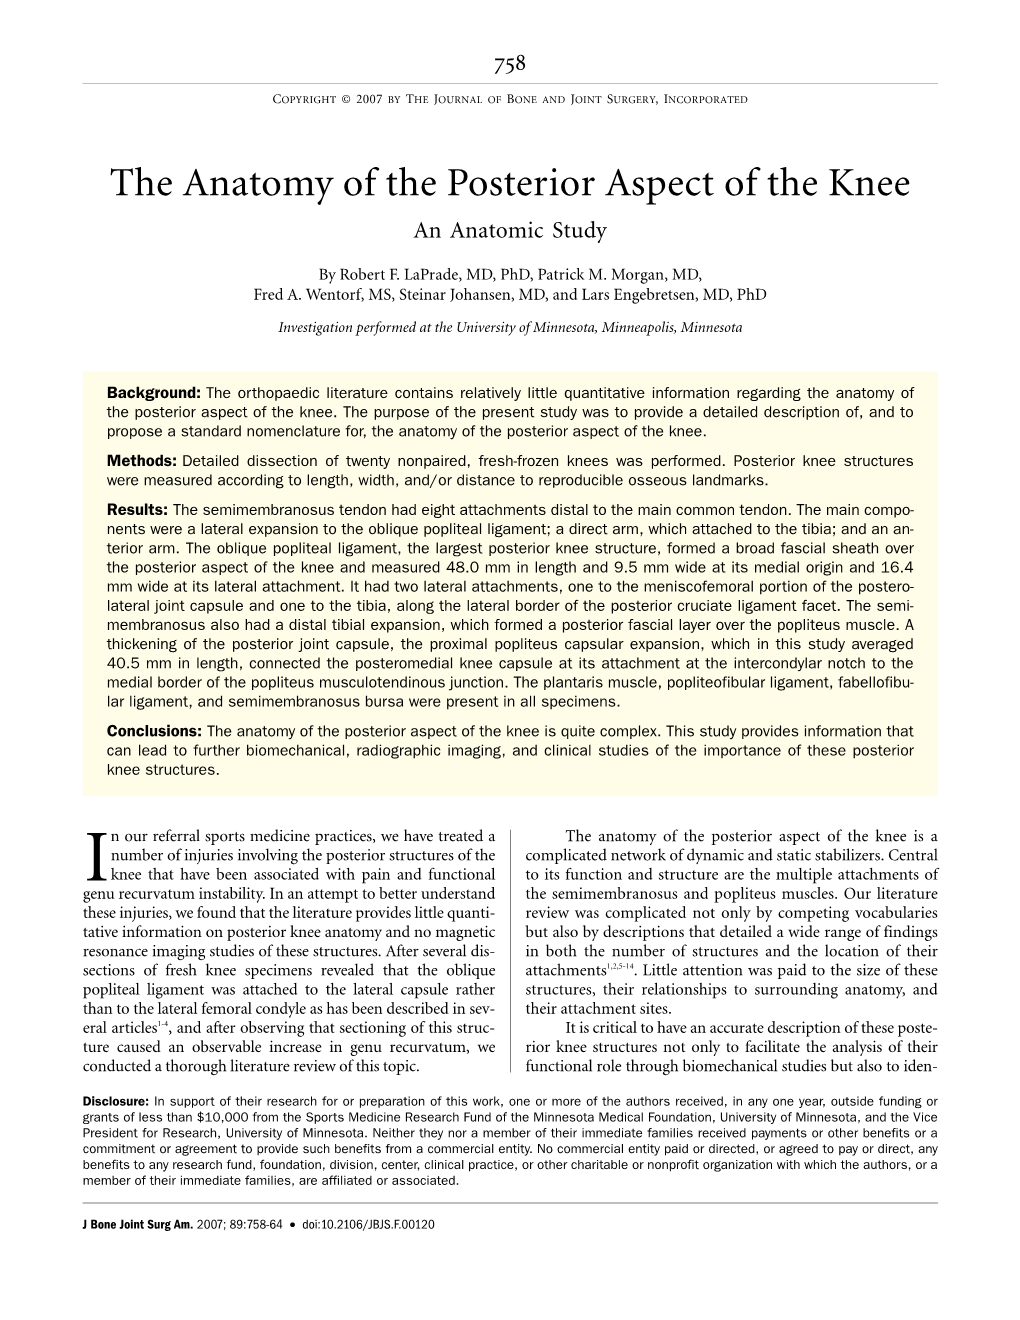 The Anatomy of the Posterior Aspect of the Knee. an Anatomic Study